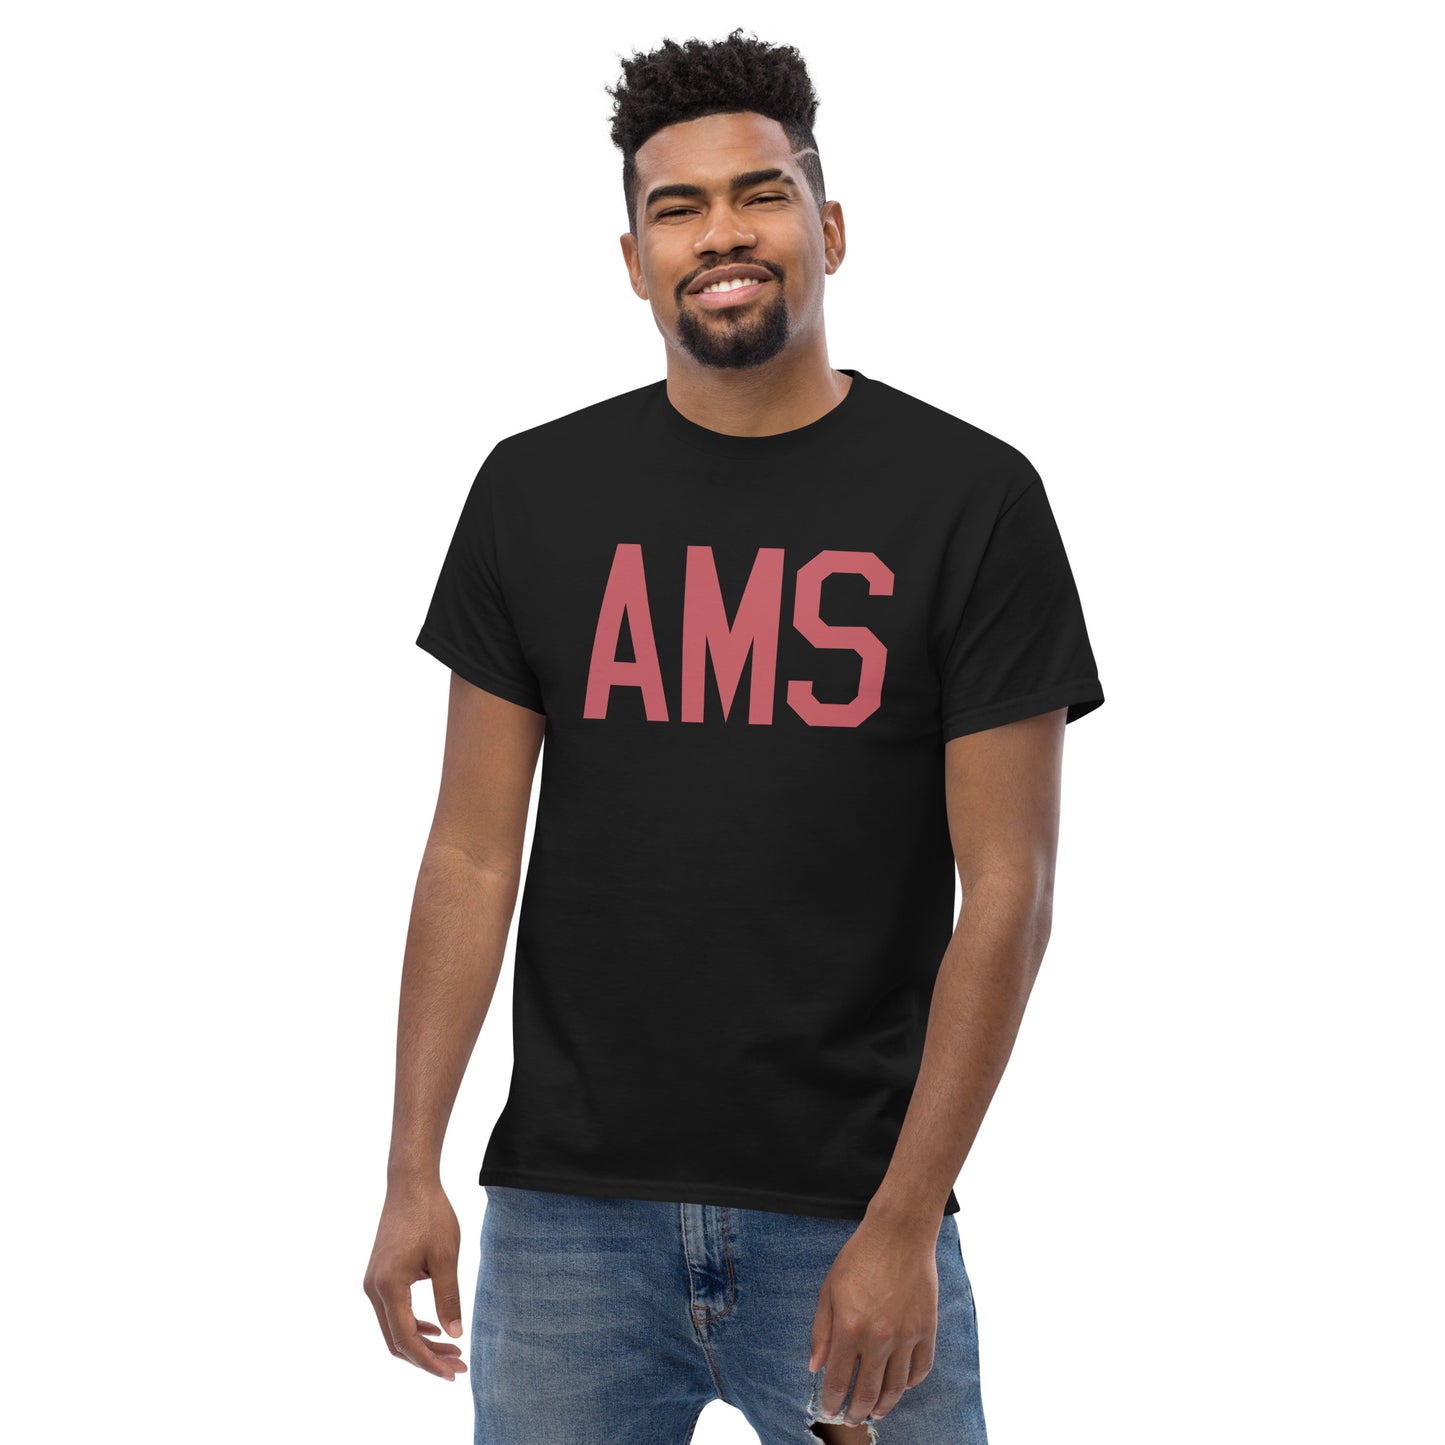 Aviation Enthusiast Men's Tee - Deep Pink Graphic • AMS Amsterdam • YHM Designs - Image 06